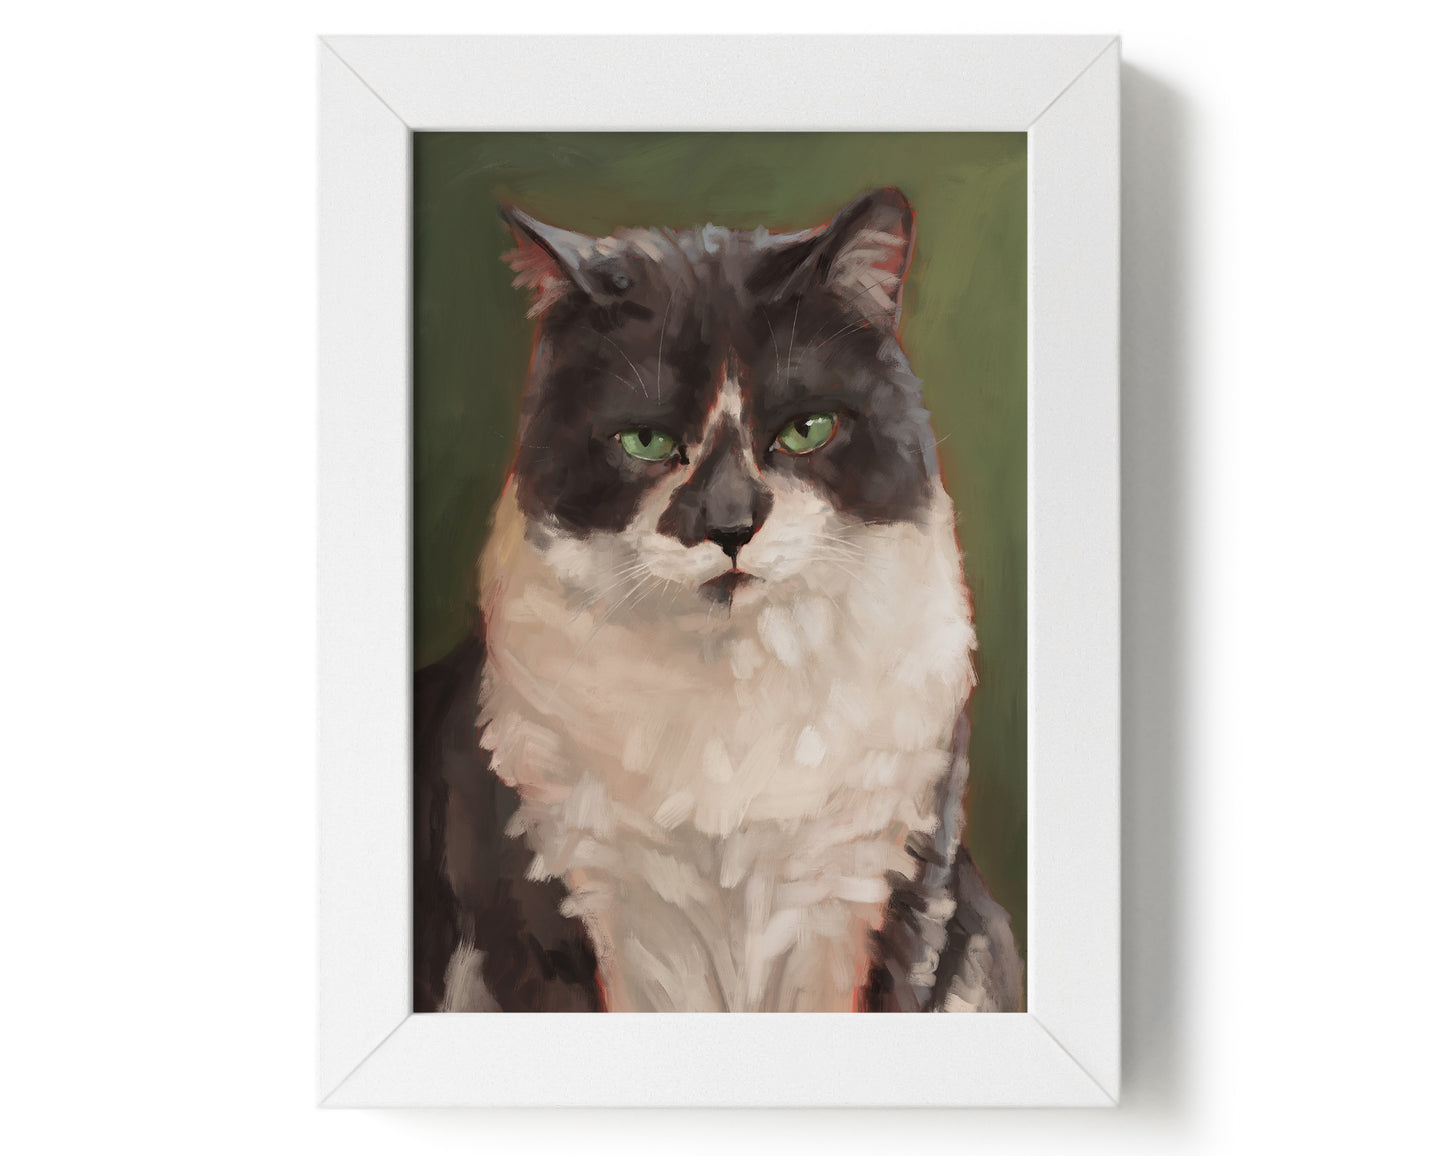 "The Unimpressed Woodhouse" by Catherine Hébert - Grey Tuxdeo Cat Painting Art Print - 5"x7" size